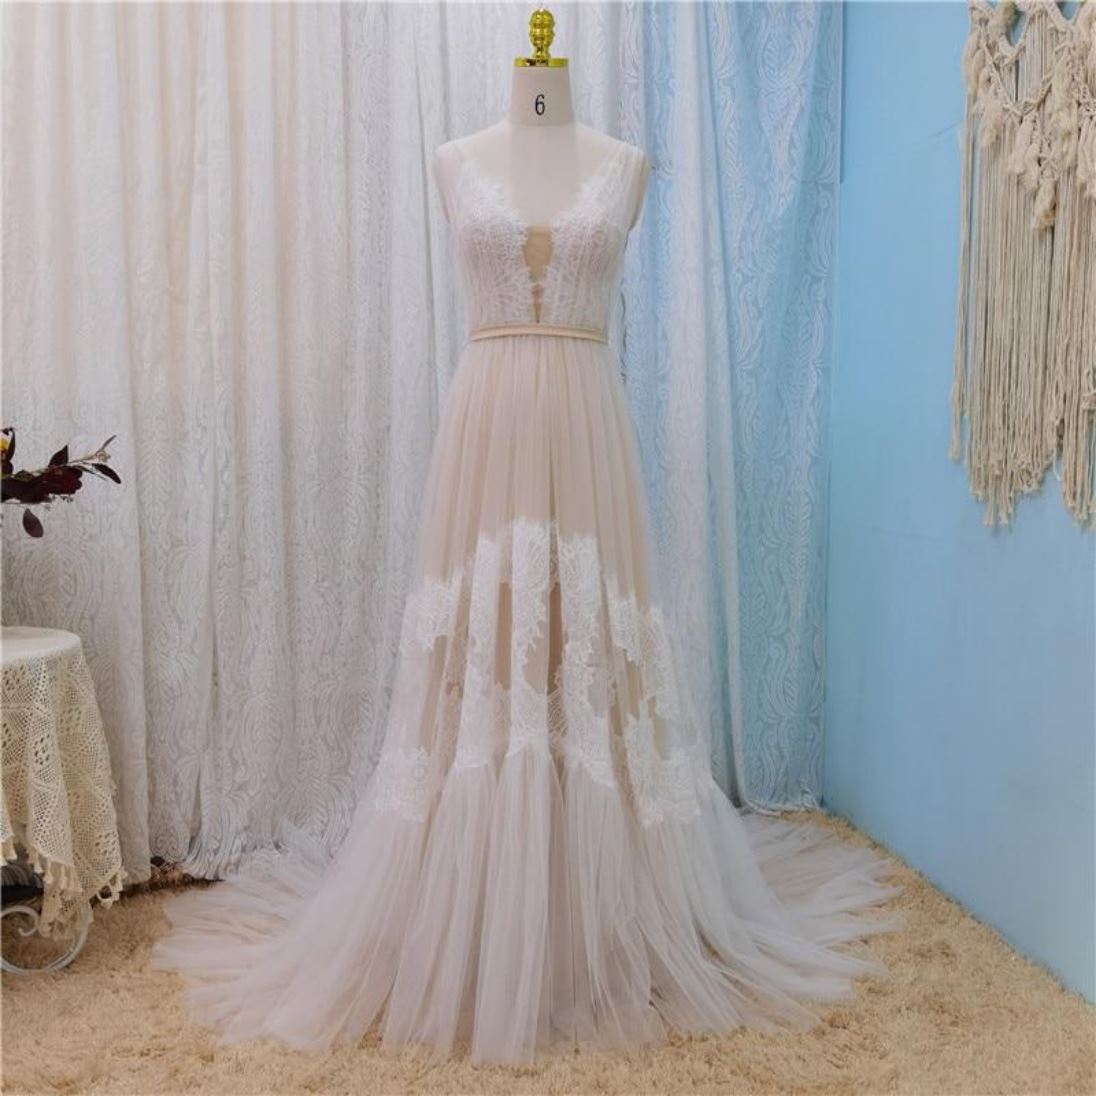 Sexy Illusion Lace Tulle V Neck Backless Bohemian Bridal Gown Boho Wedding Dresses BlissGown Ivory and champagne 6 